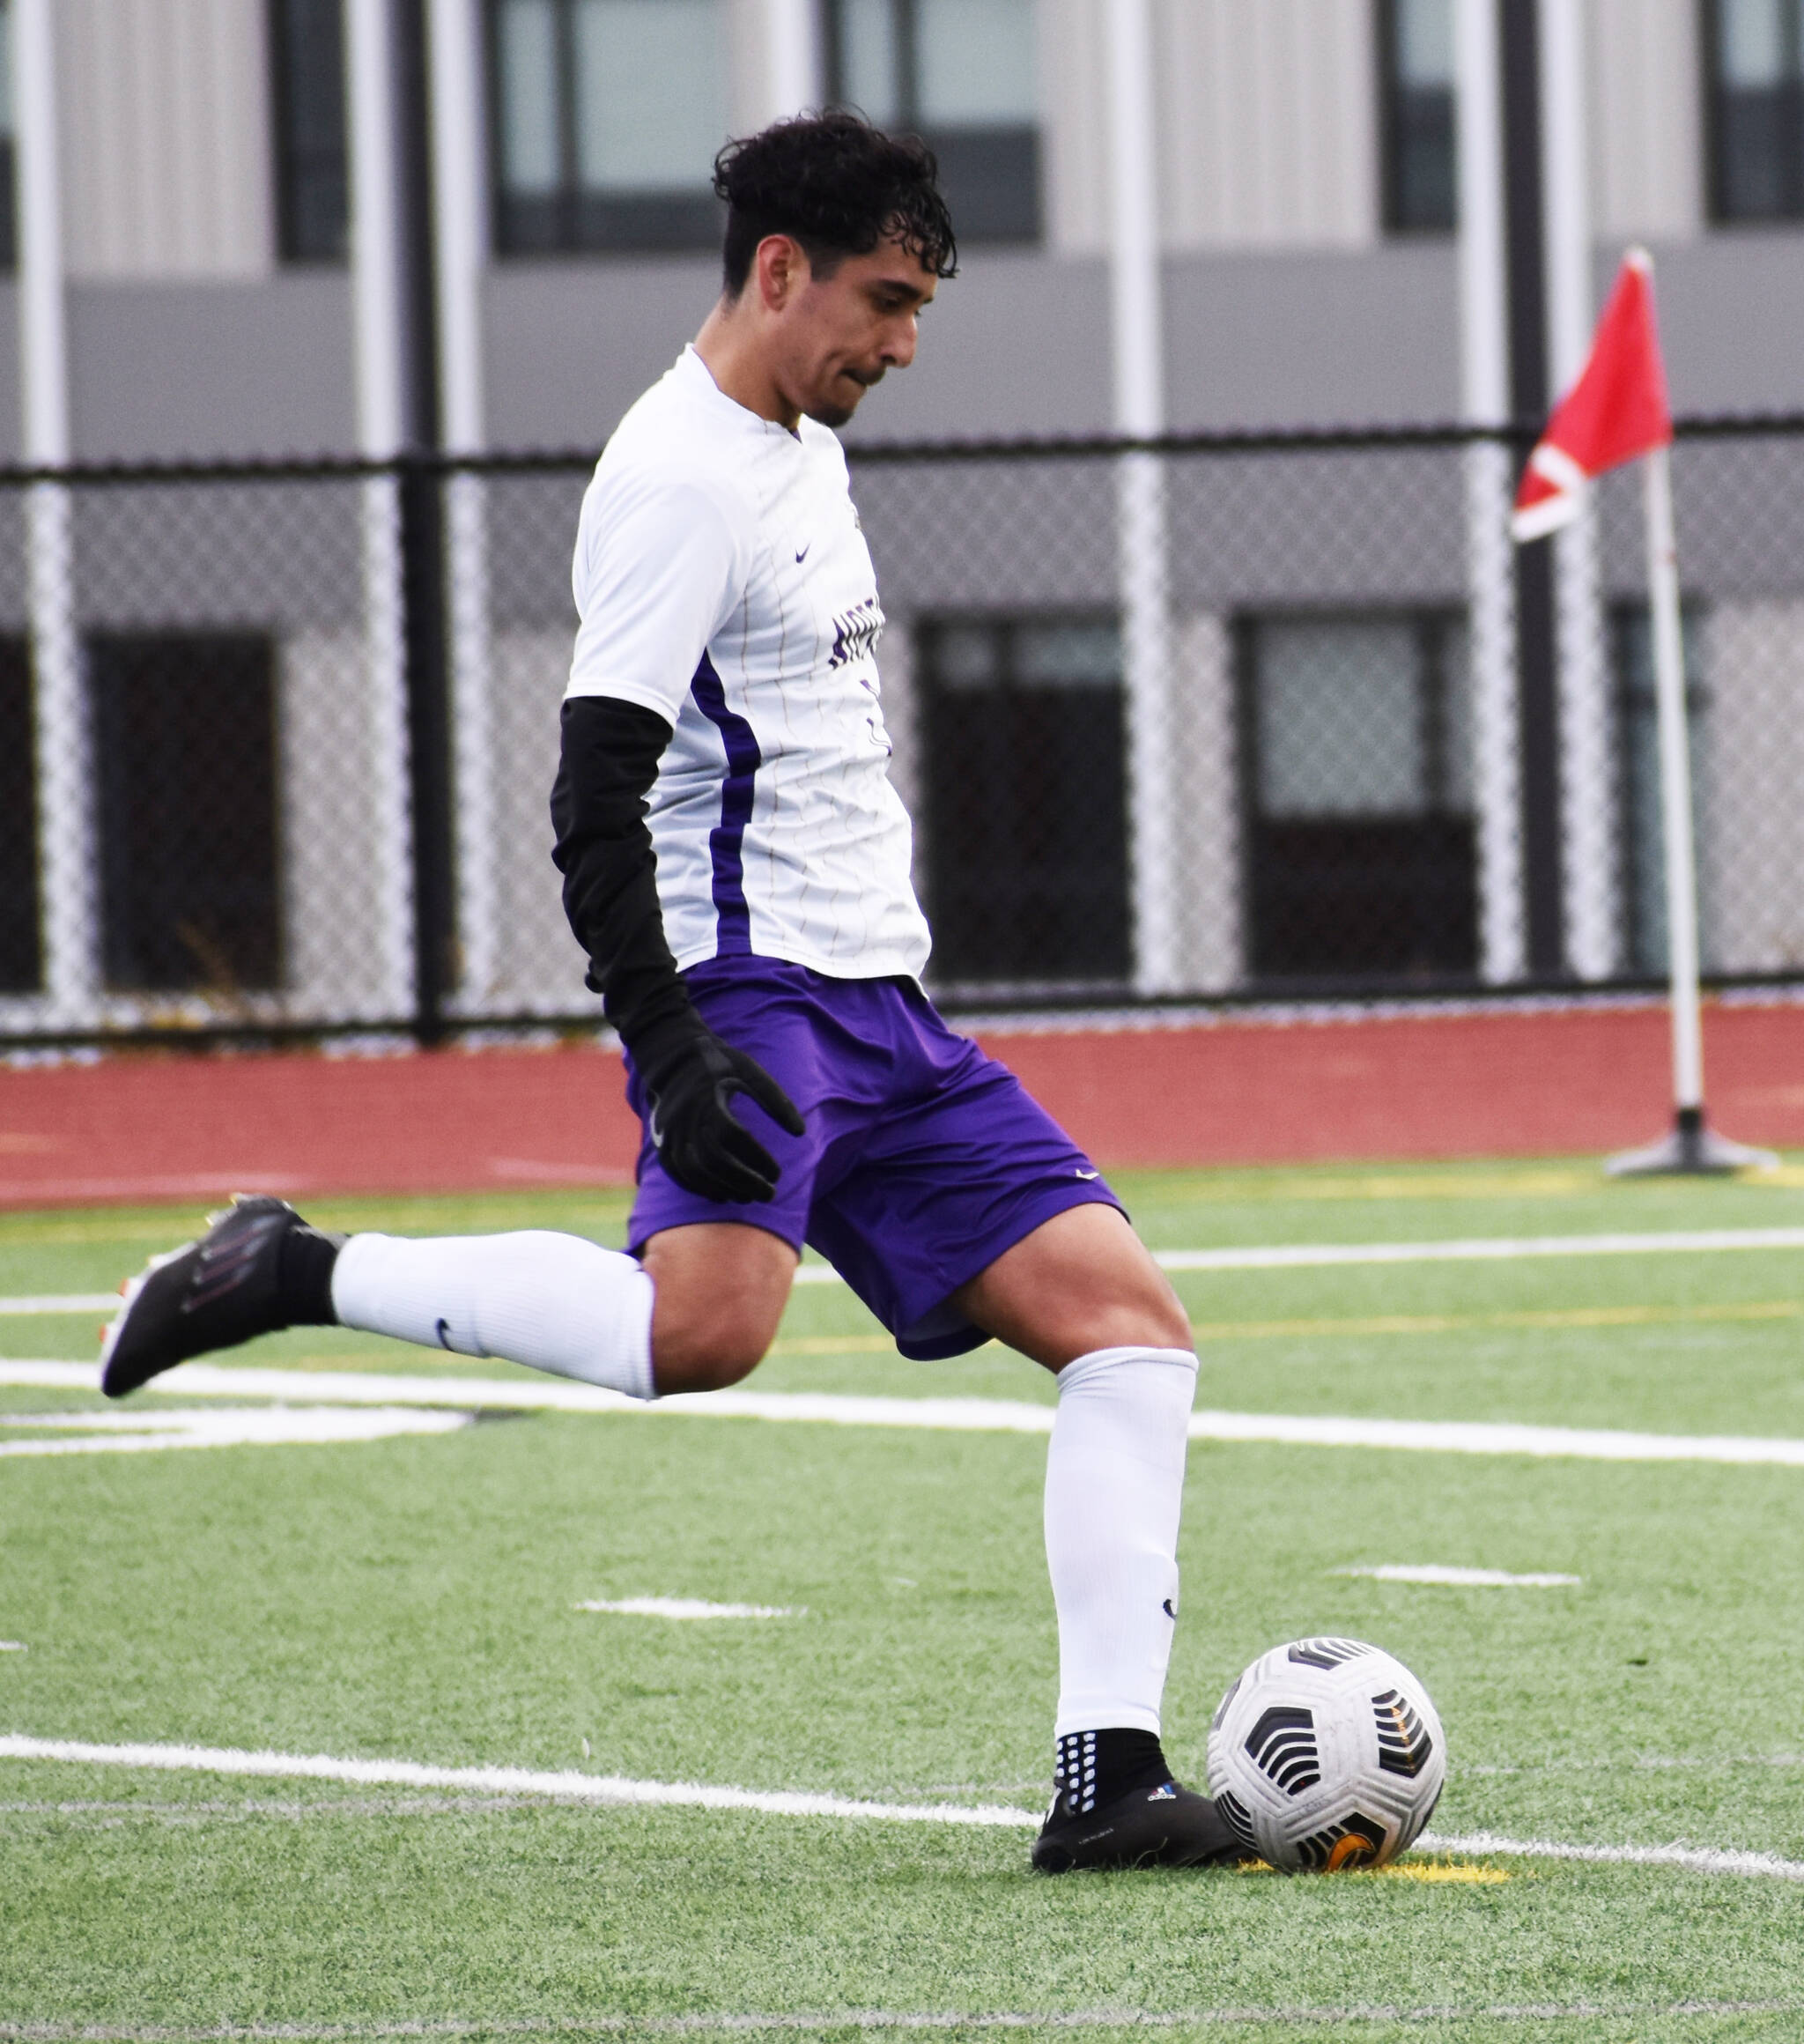 North Kitsap’s Junior Larios scores a penalty kick to tie the game.